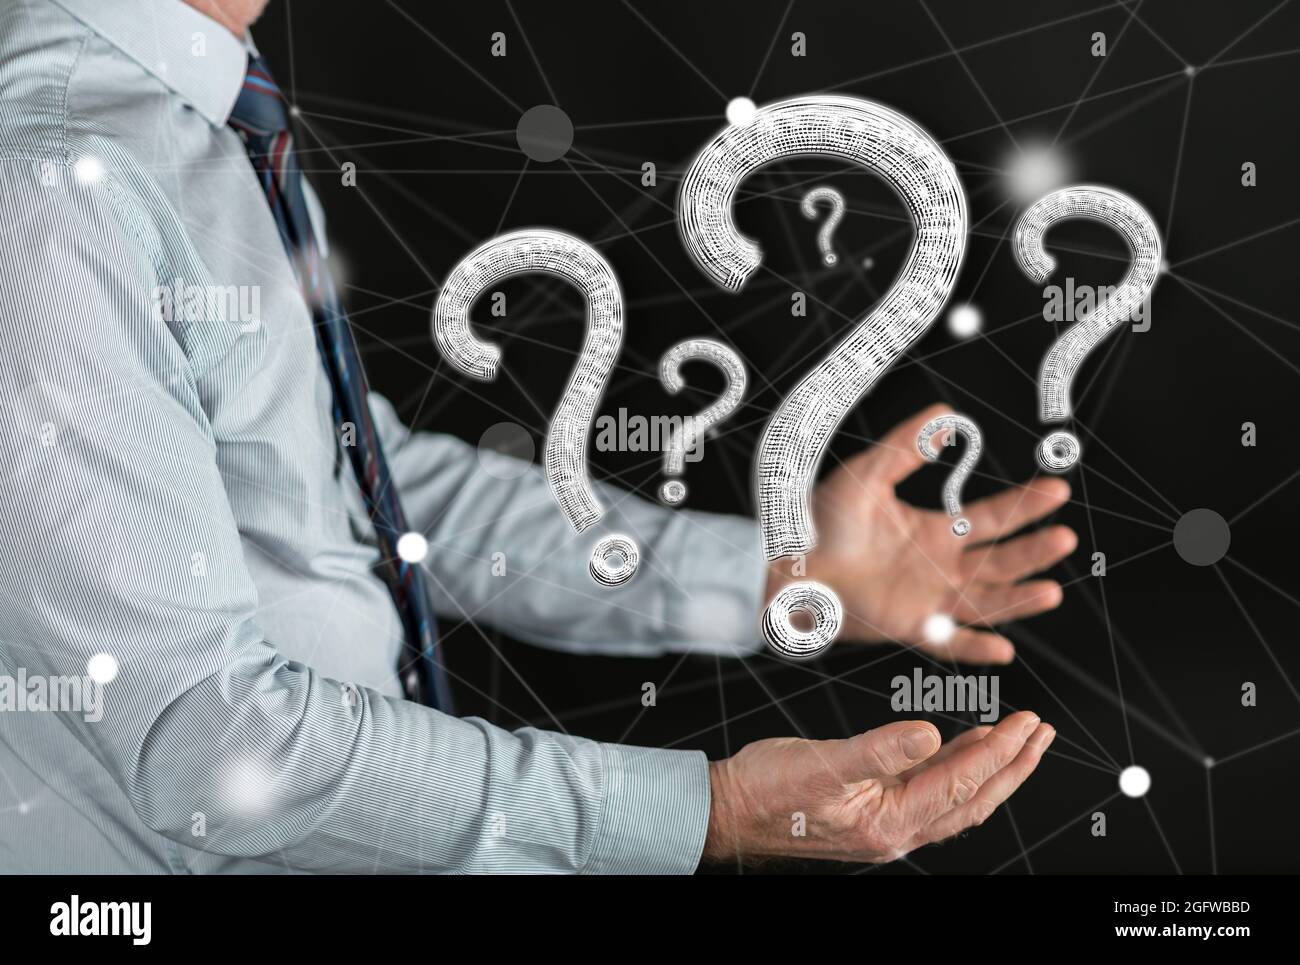 Question concept above the hands of a man Stock Photo